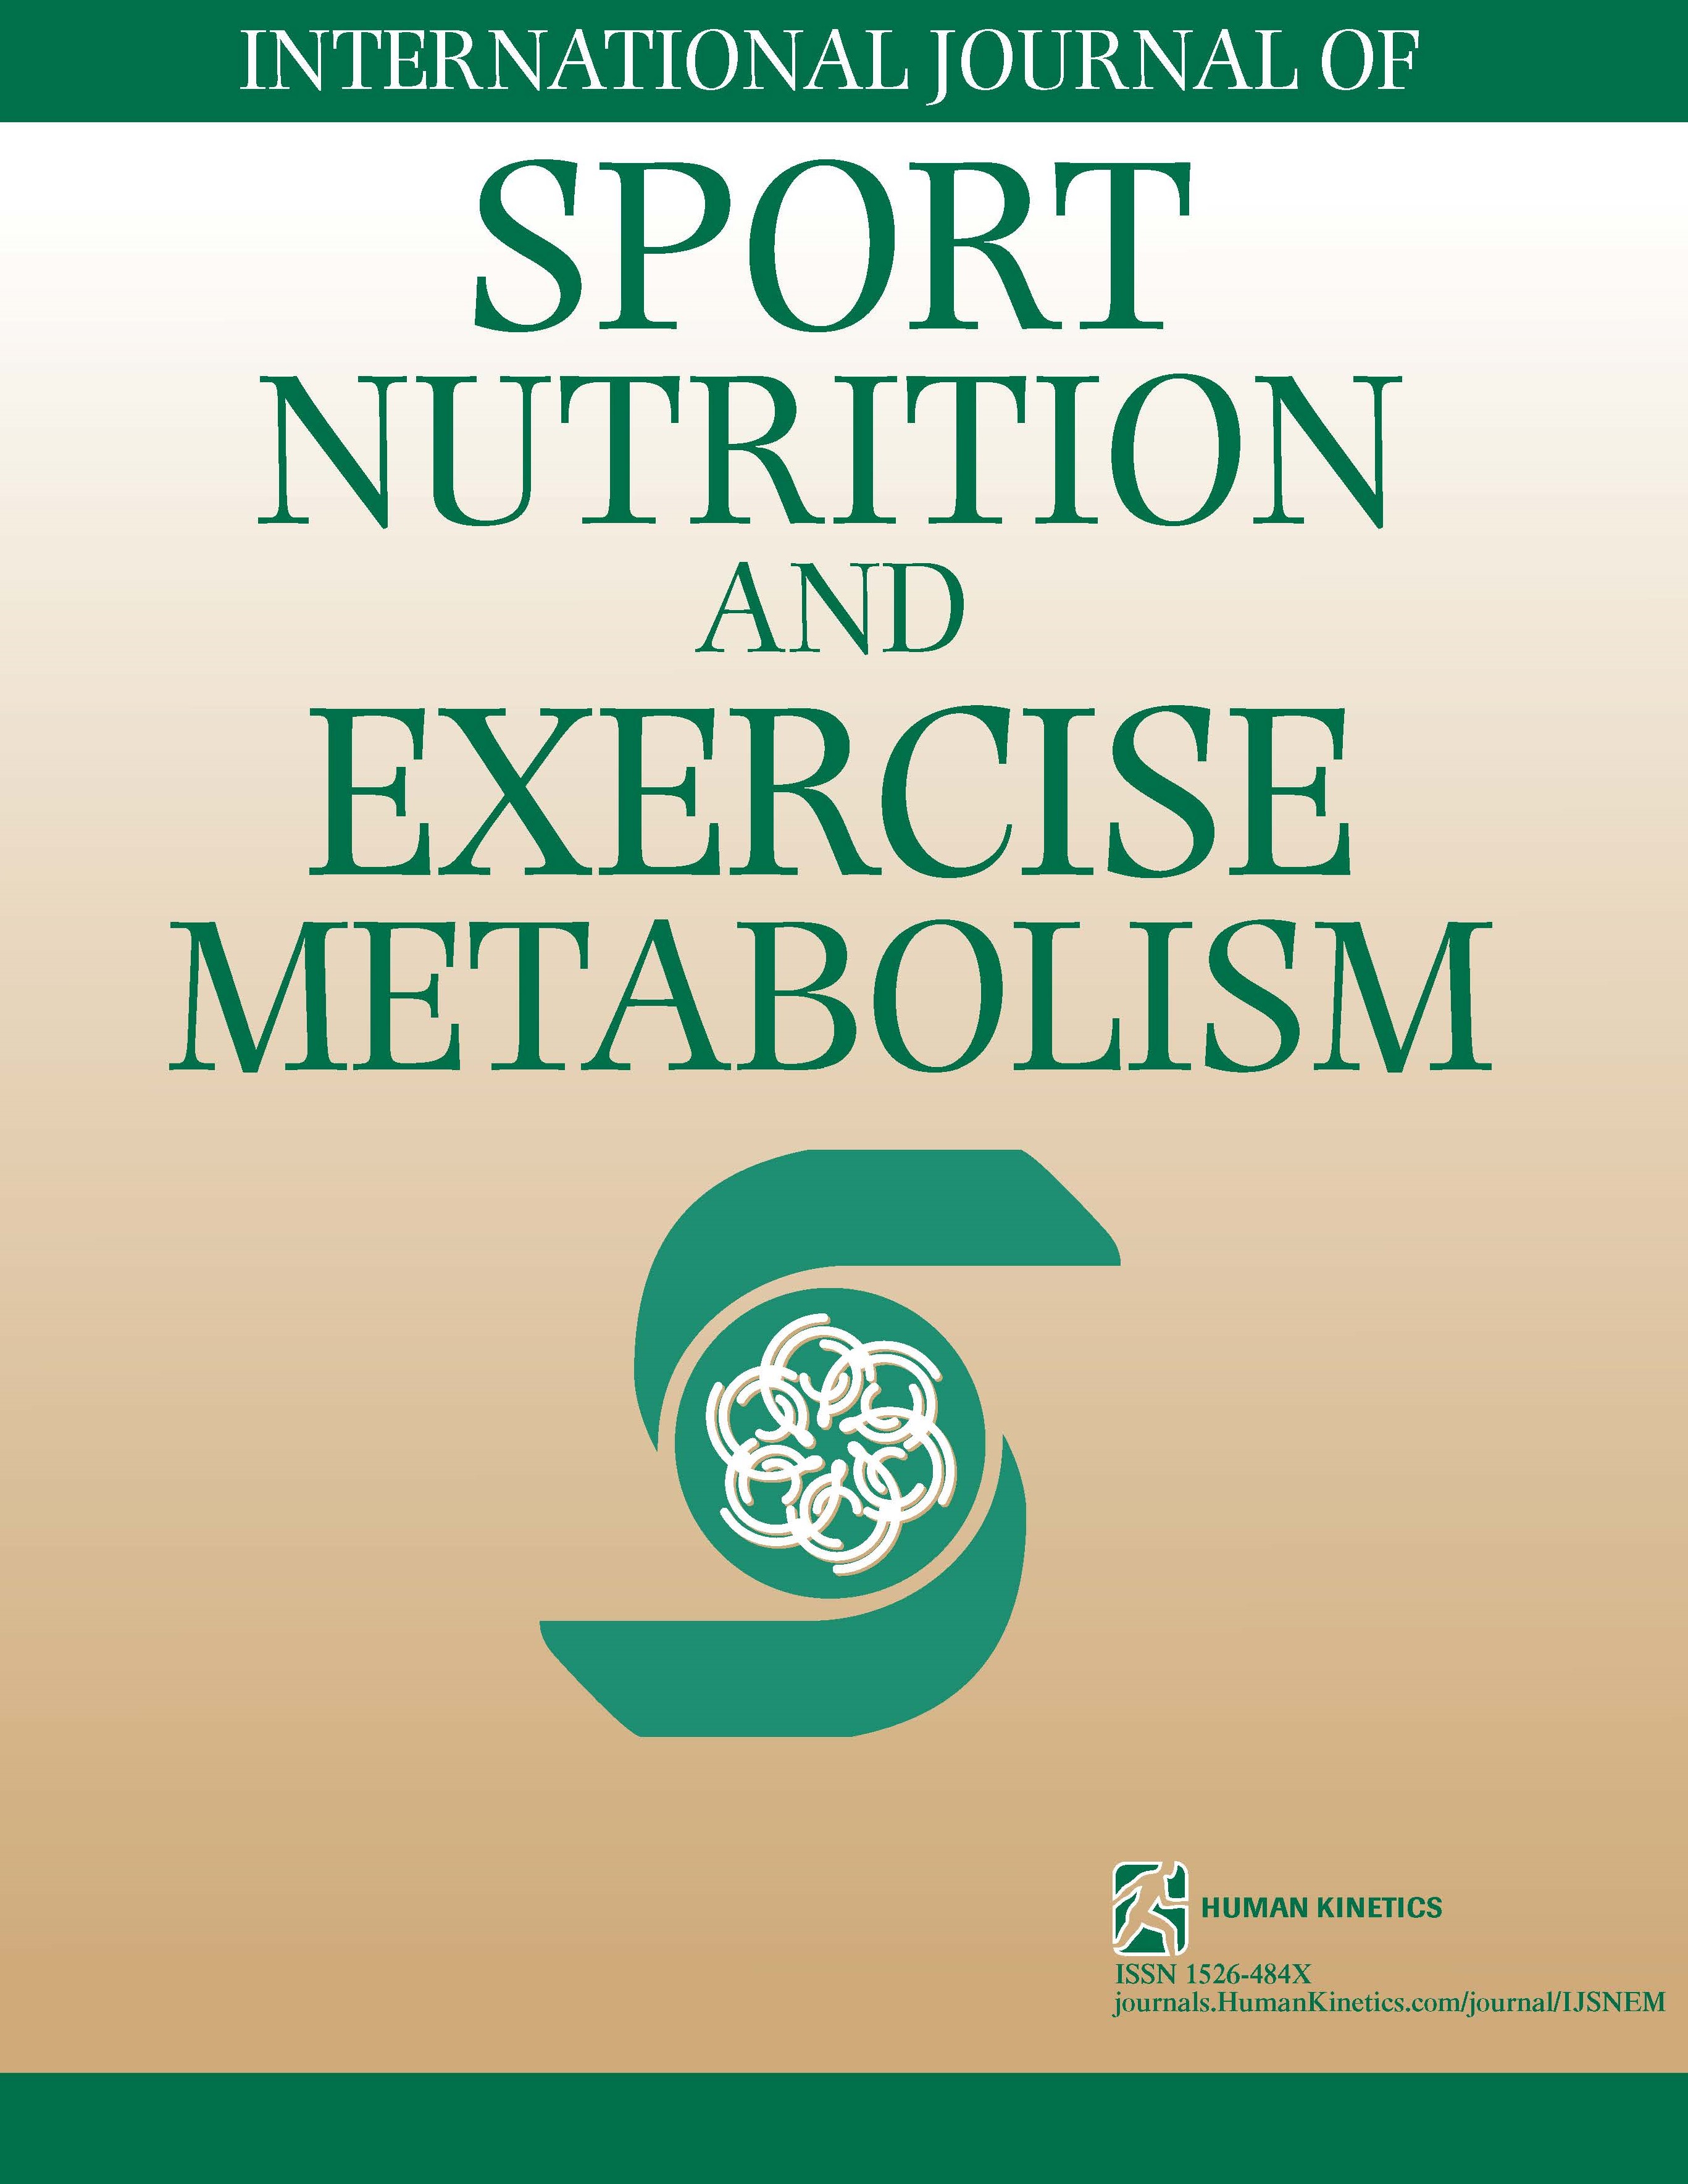 Dietary Supplements for Athletic Performance in Women: Beta-Alanine, Caffeine, and Nitrate